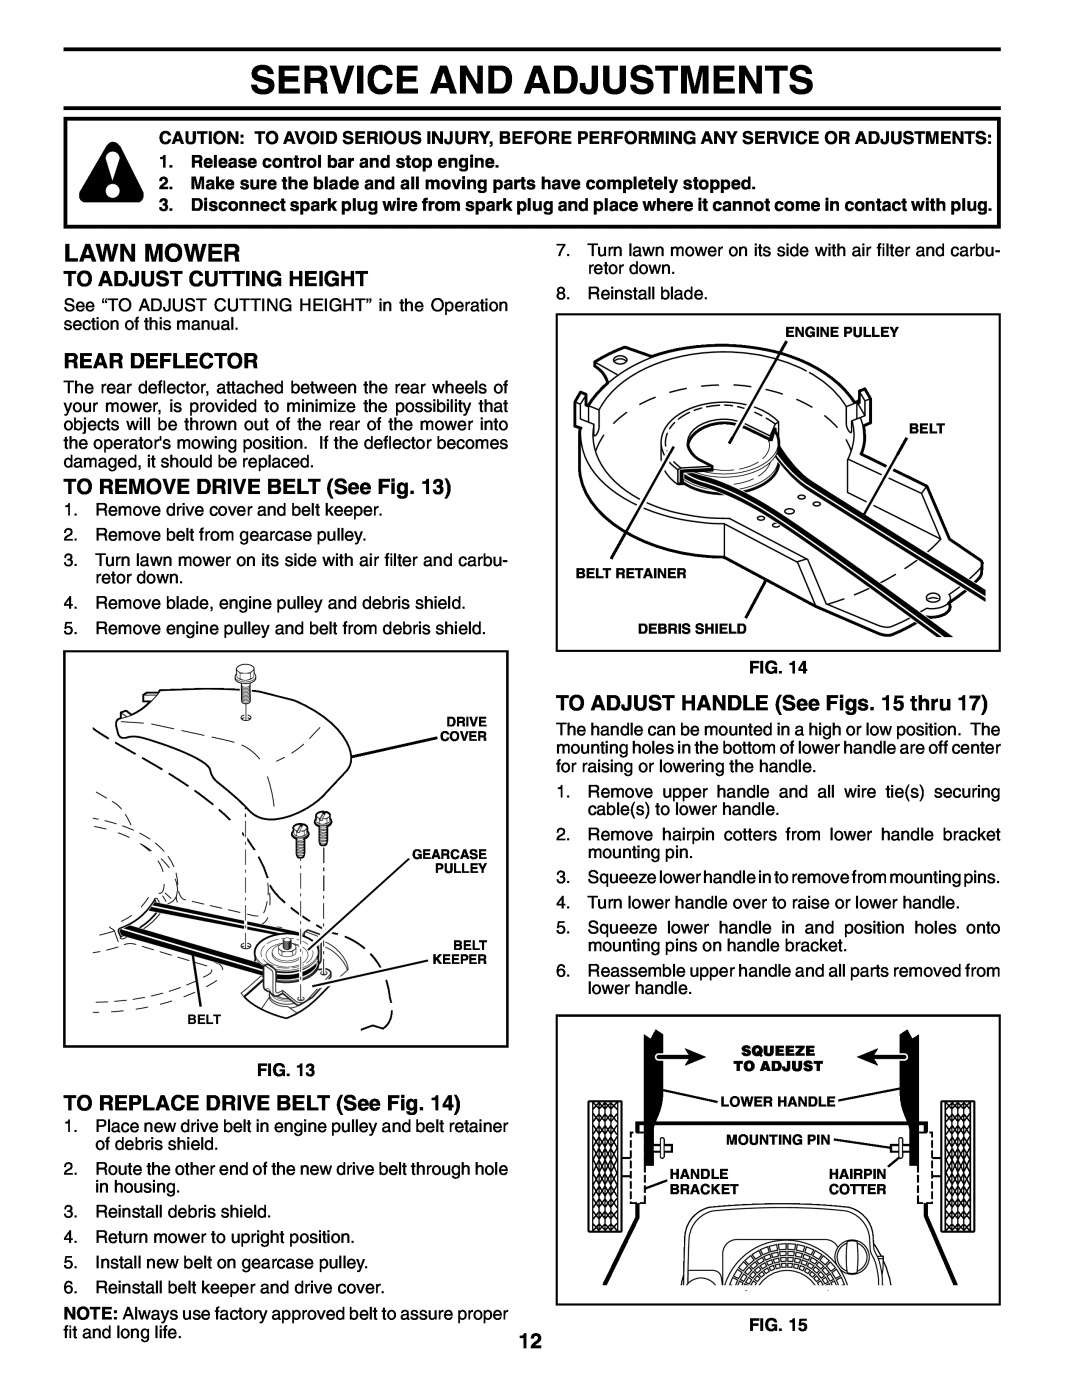 Husqvarna 62522SH Service And Adjustments, To Adjust Cutting Height, Rear Deflector, TO REMOVE DRIVE BELT See Fig 